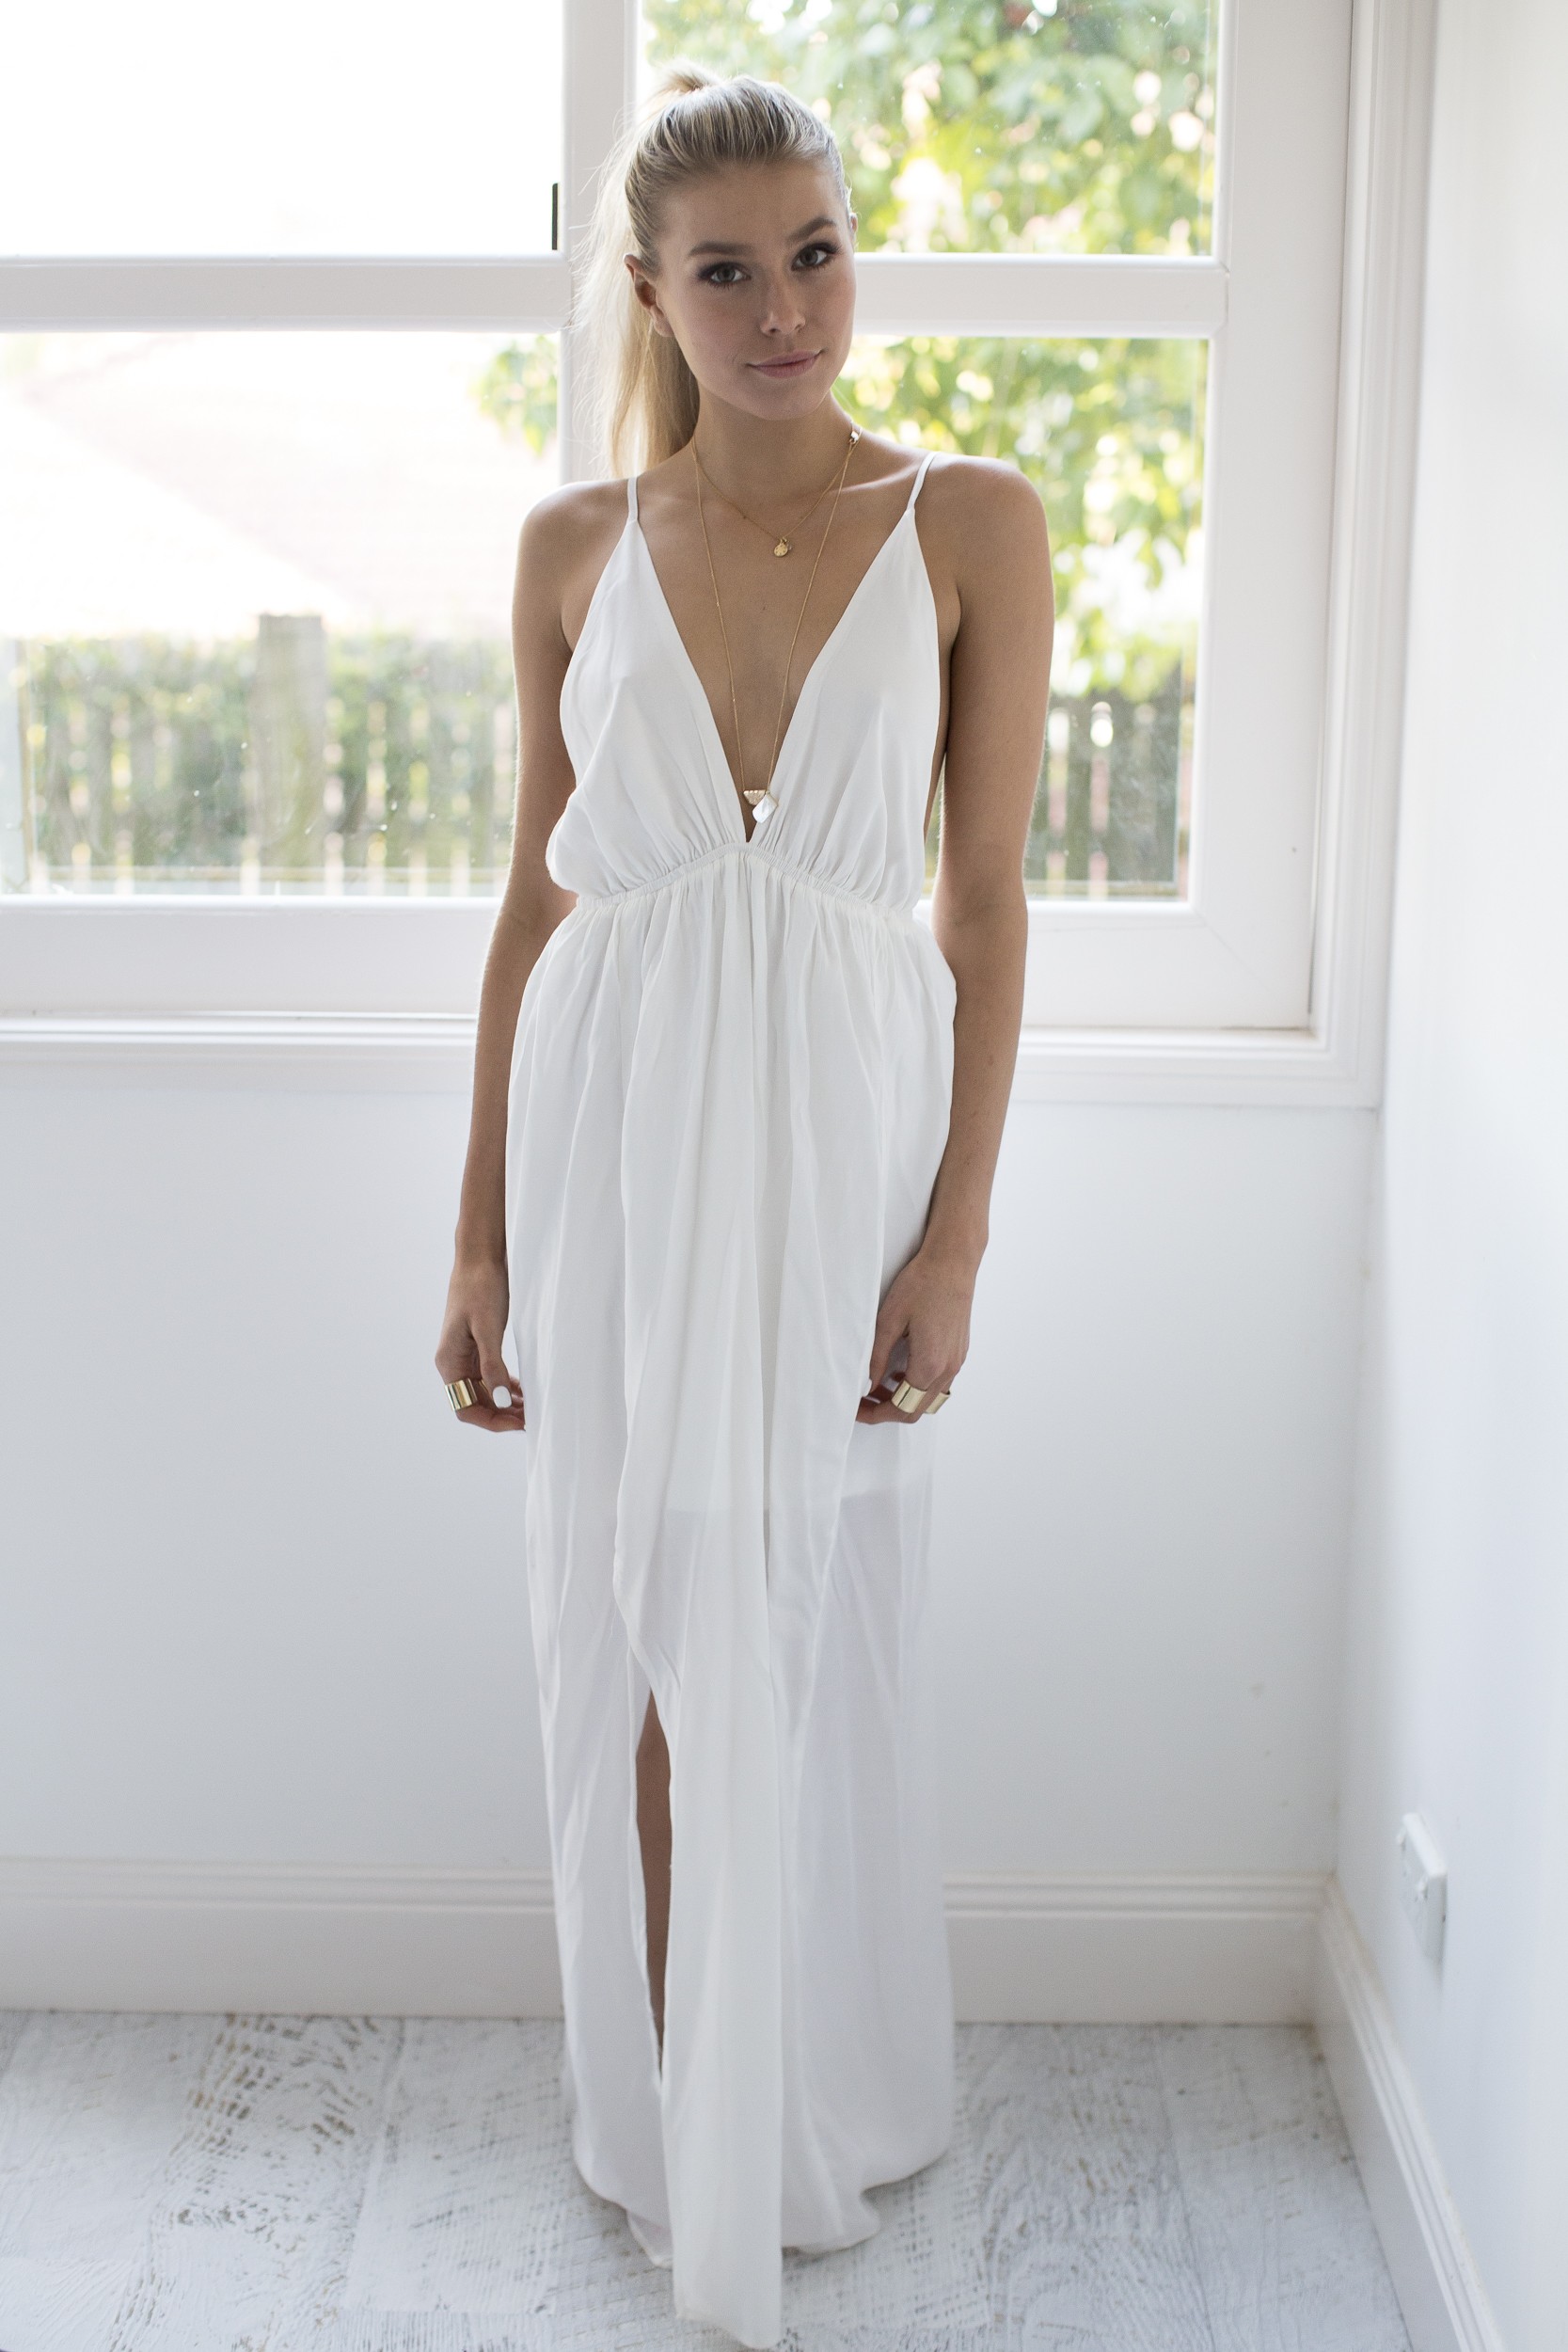 PRETTY WHITE MAXI DRESSES FOR THE SUMMER....... - Godfather Style